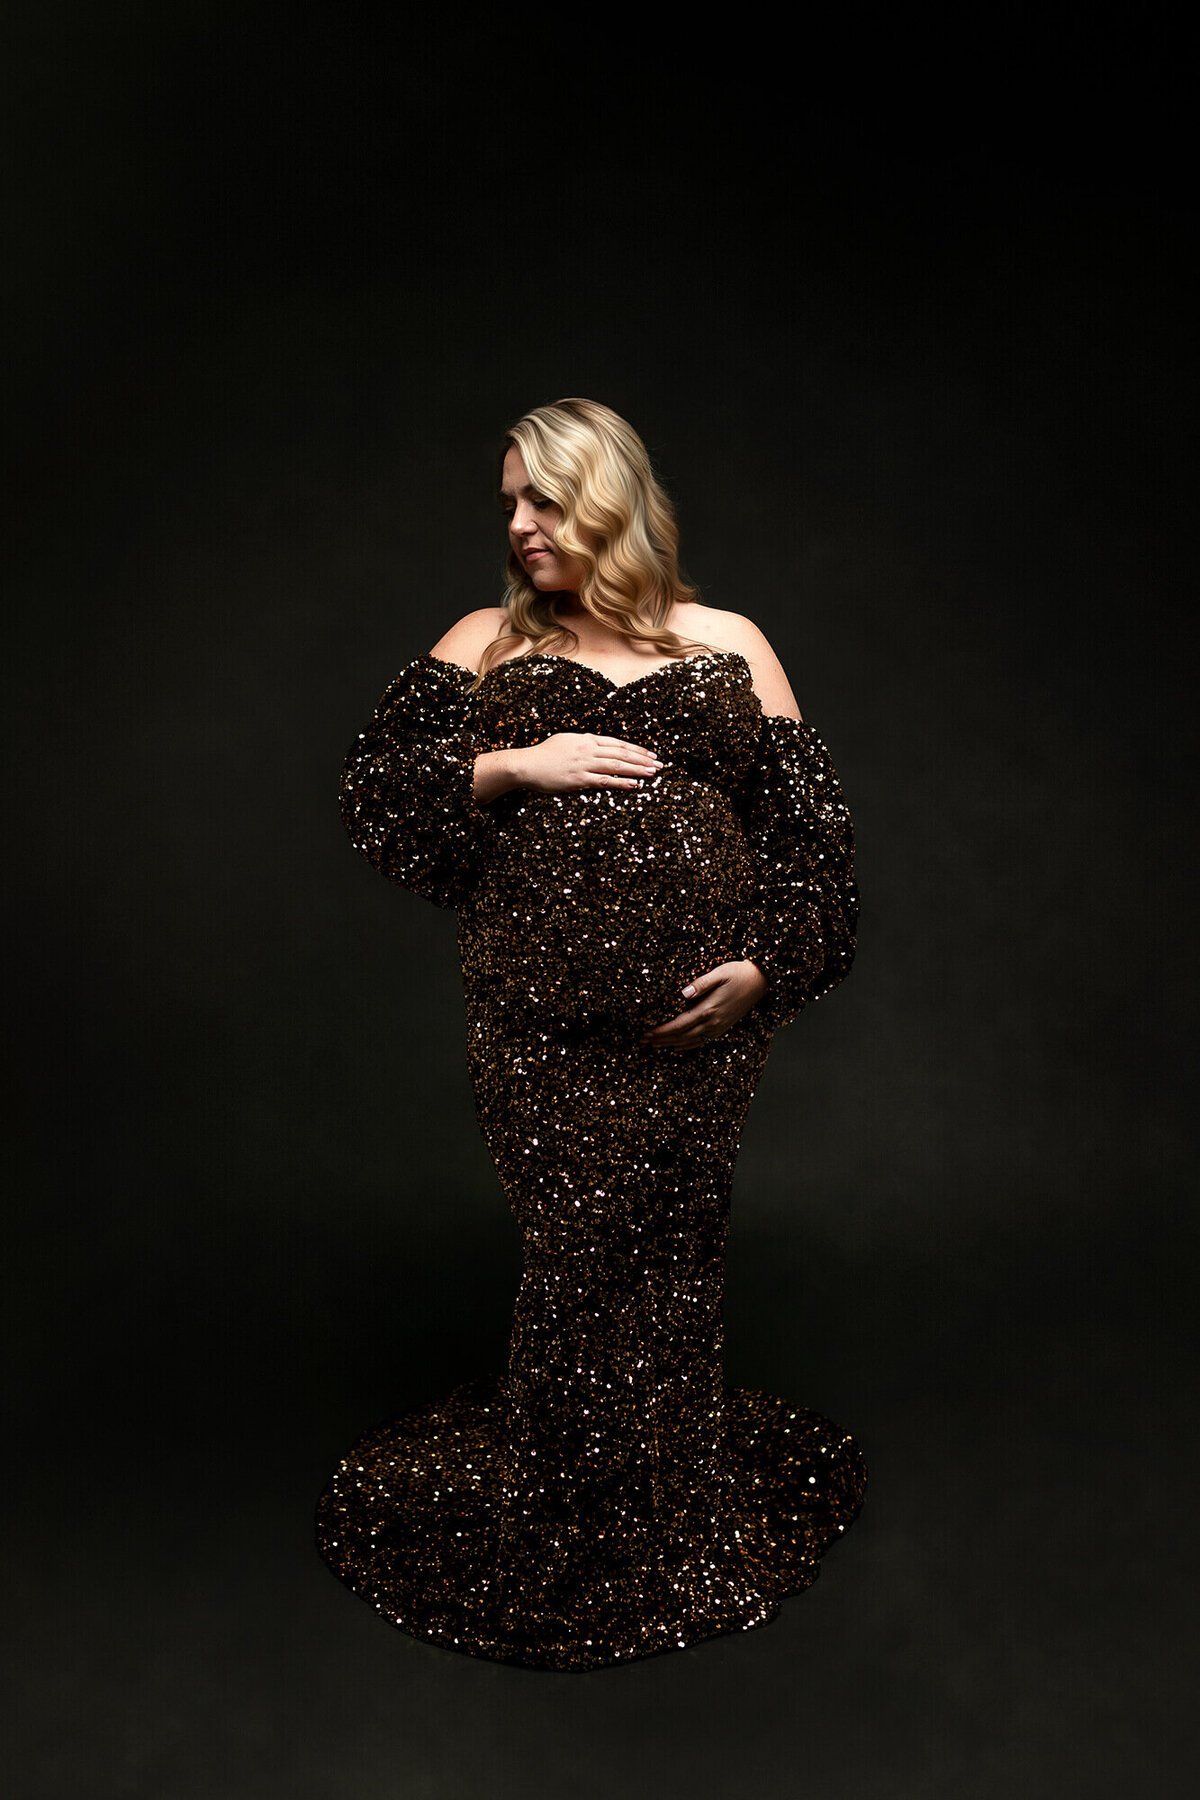 Stunning mother wearing a gold and black gown.